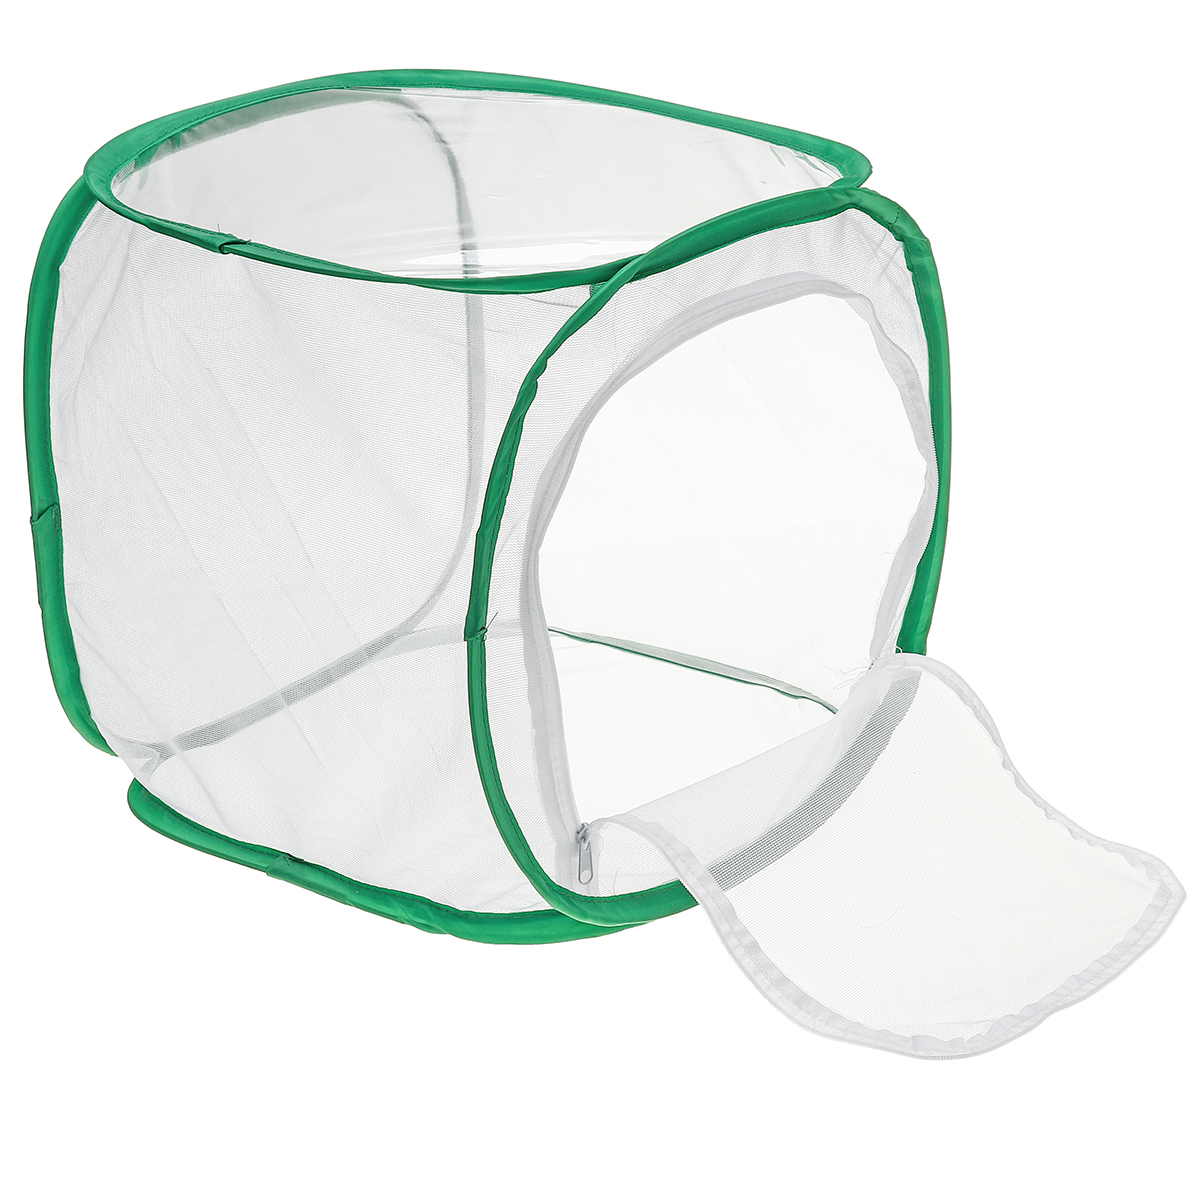 Green-Collapsible-Insect-Habitat-Cage-Butterfly-Mesh-Transparent-Surface-Portable-Zipper-Cage-Plant--1688452-9